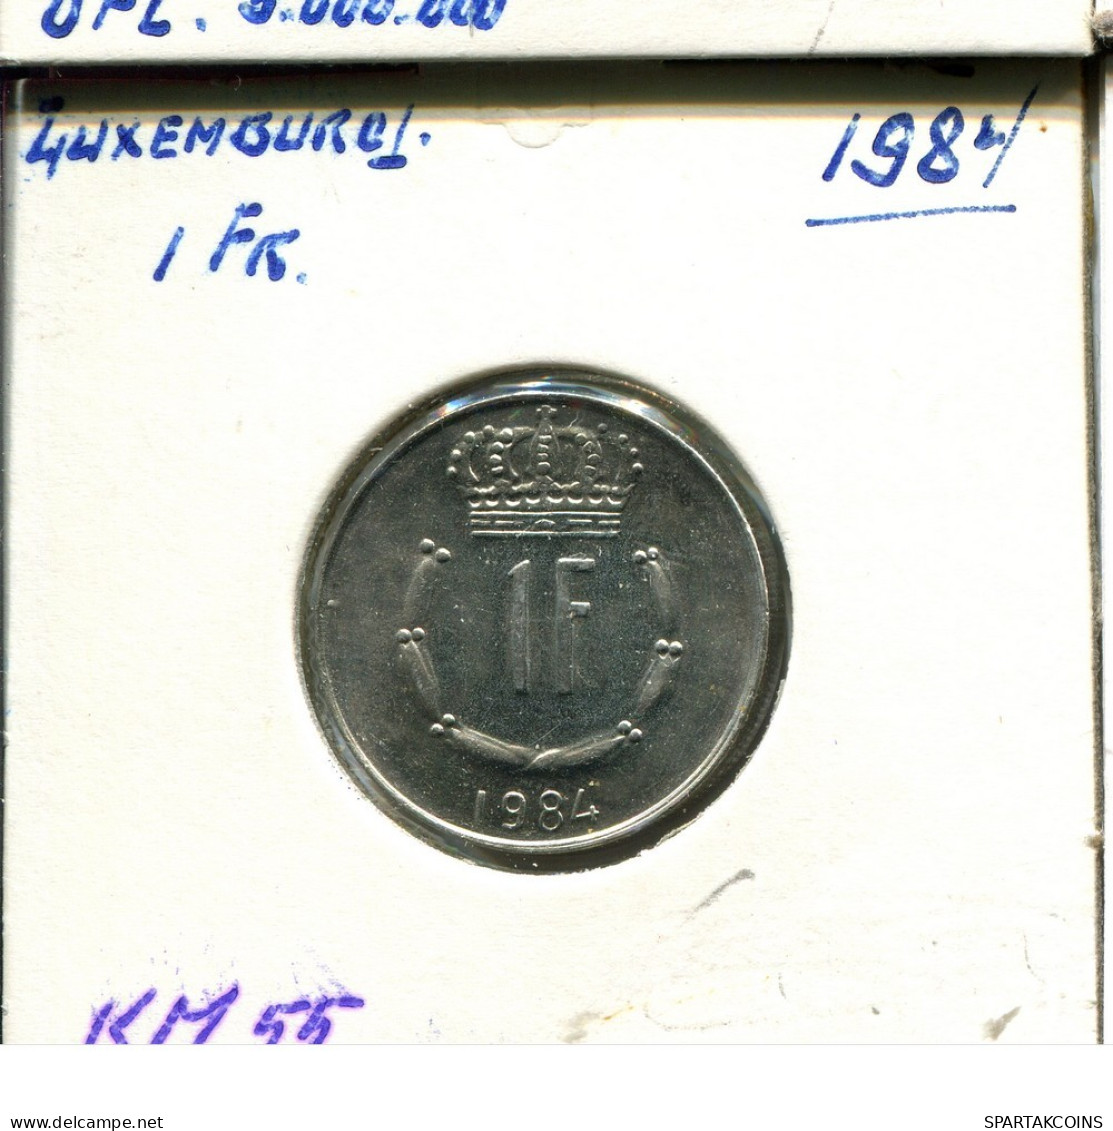 1 FRANC 1984 LUXEMBOURG Coin #AT220.U.A - Luxembourg